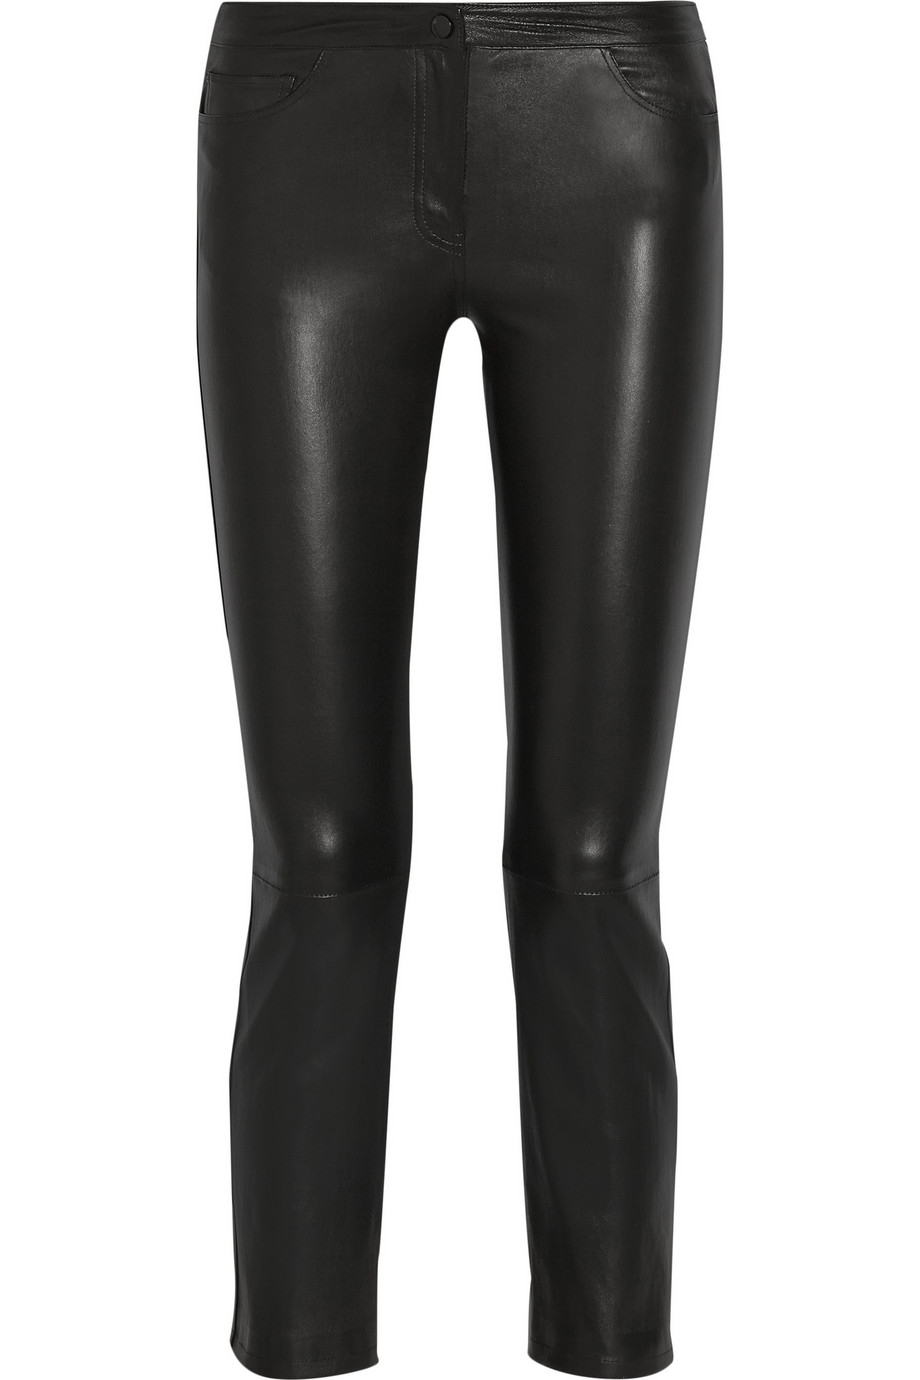 Lyst - The Row Landly Cropped Stretch-Leather Straight-Leg Pants in Black